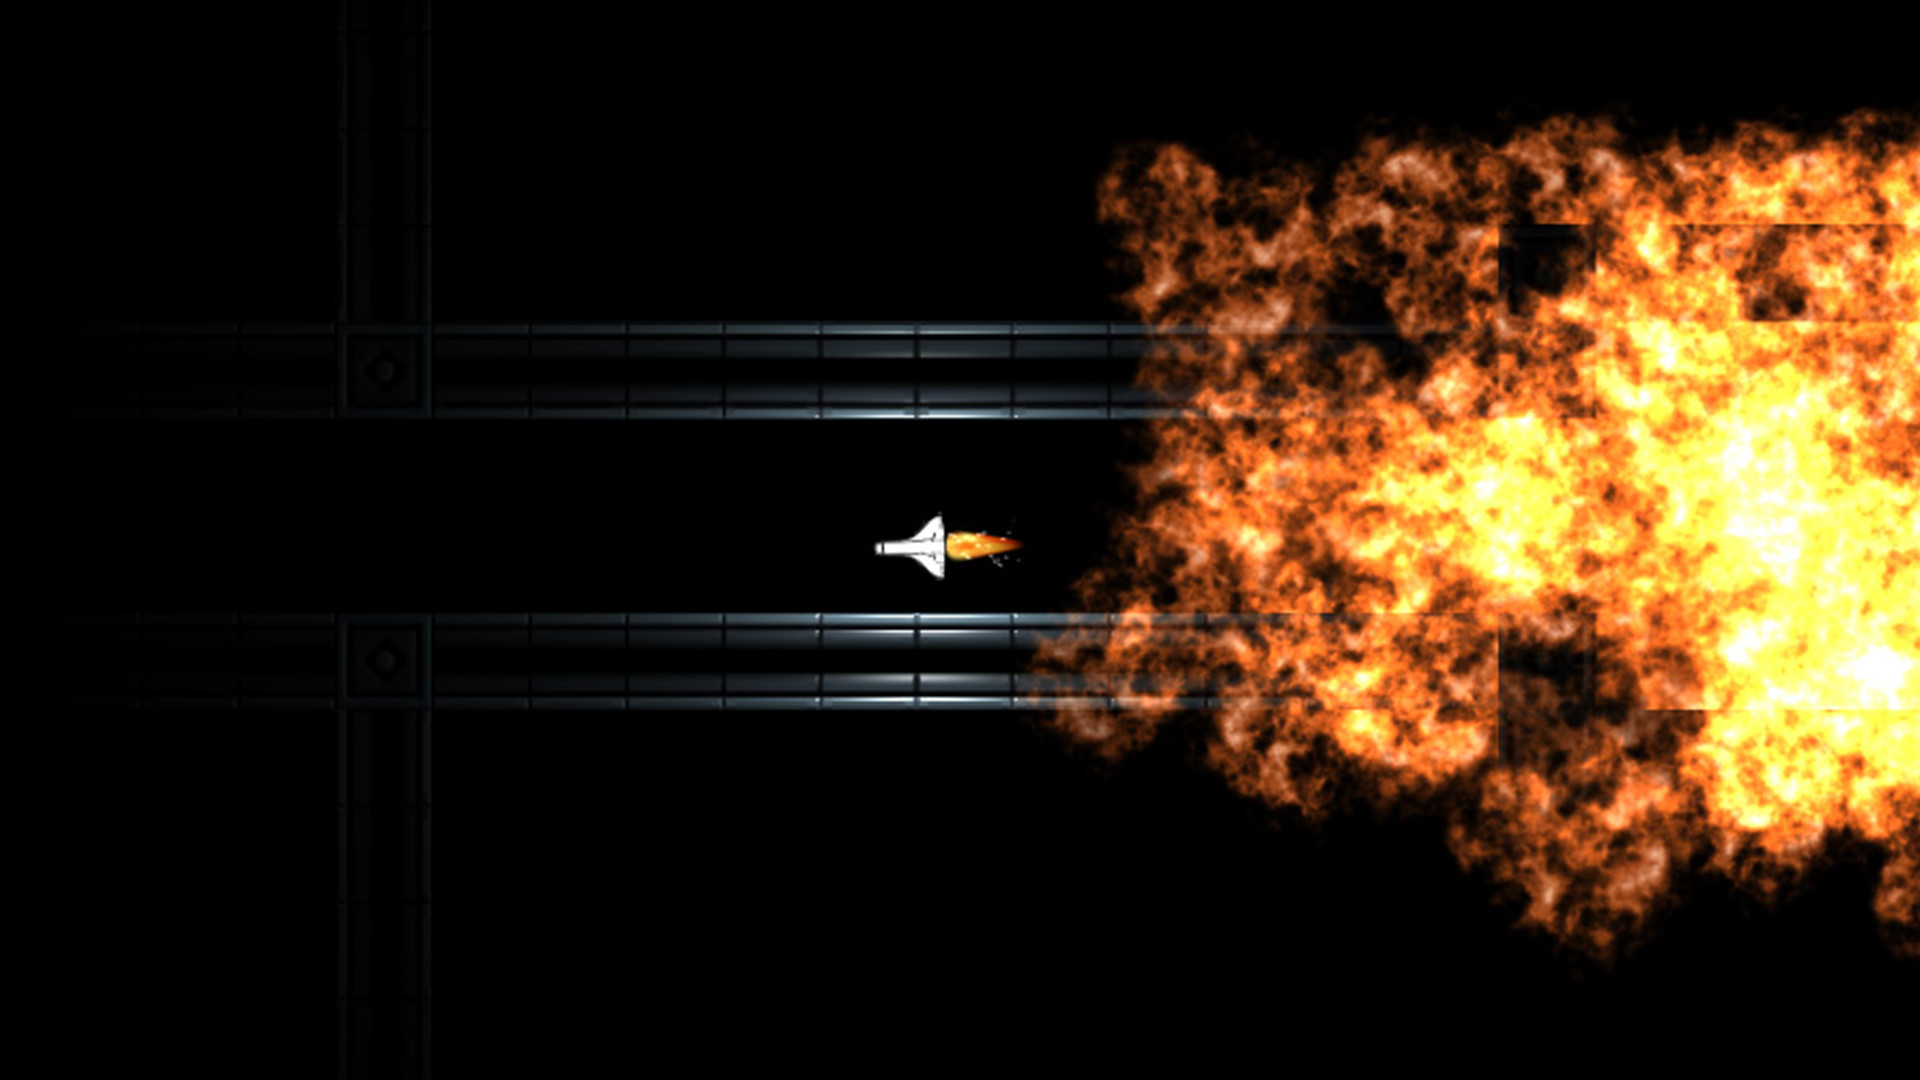 Colossus Mission - adventure in space, arcade game screenshot